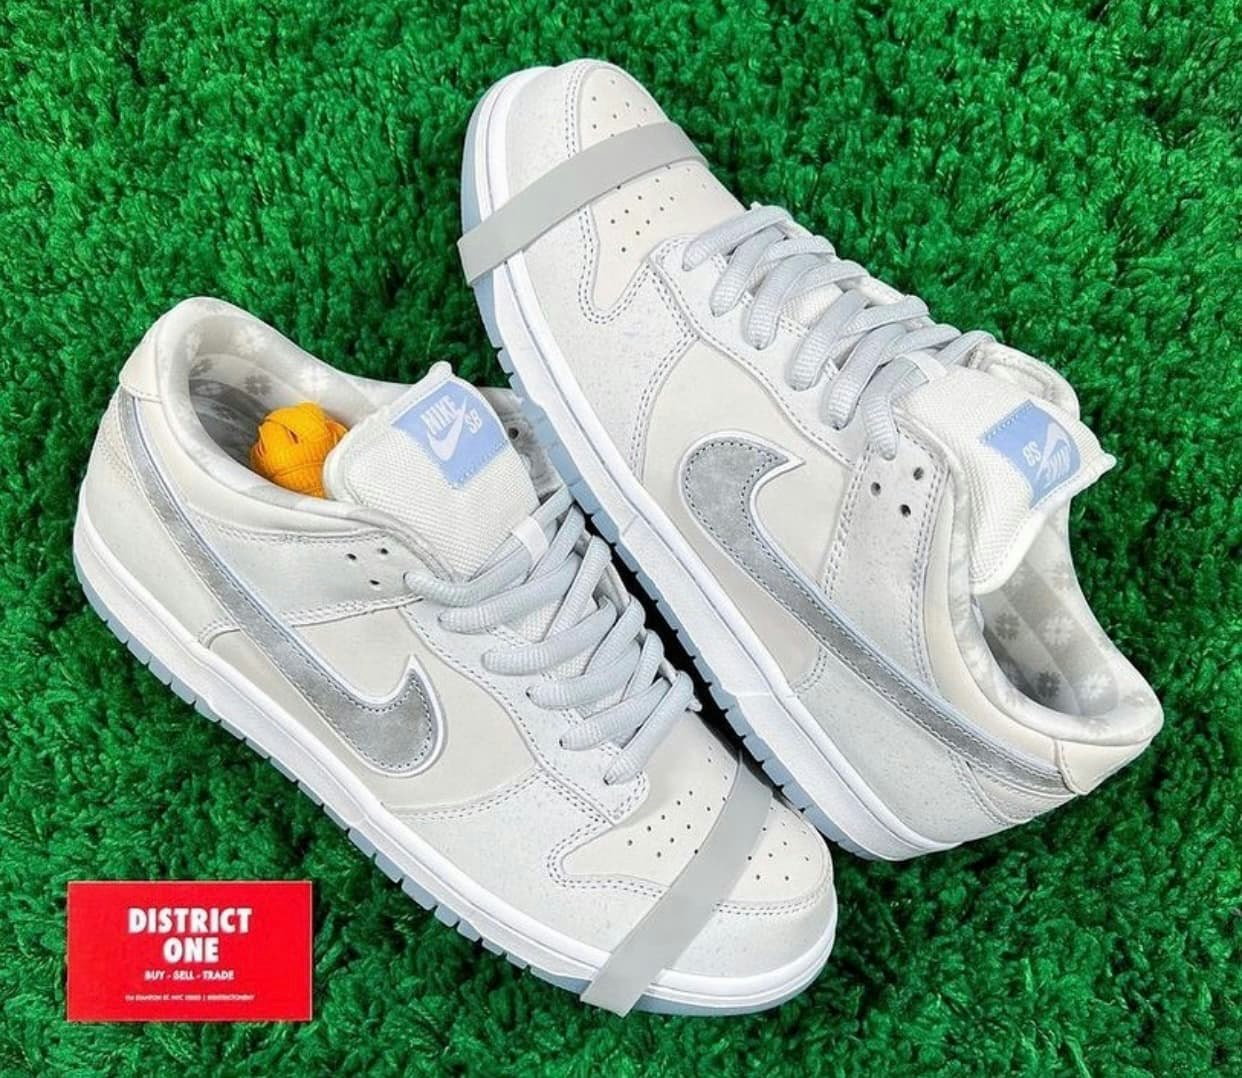 Concepts x Nike SB Dunk Low "White Lobster" kaufen